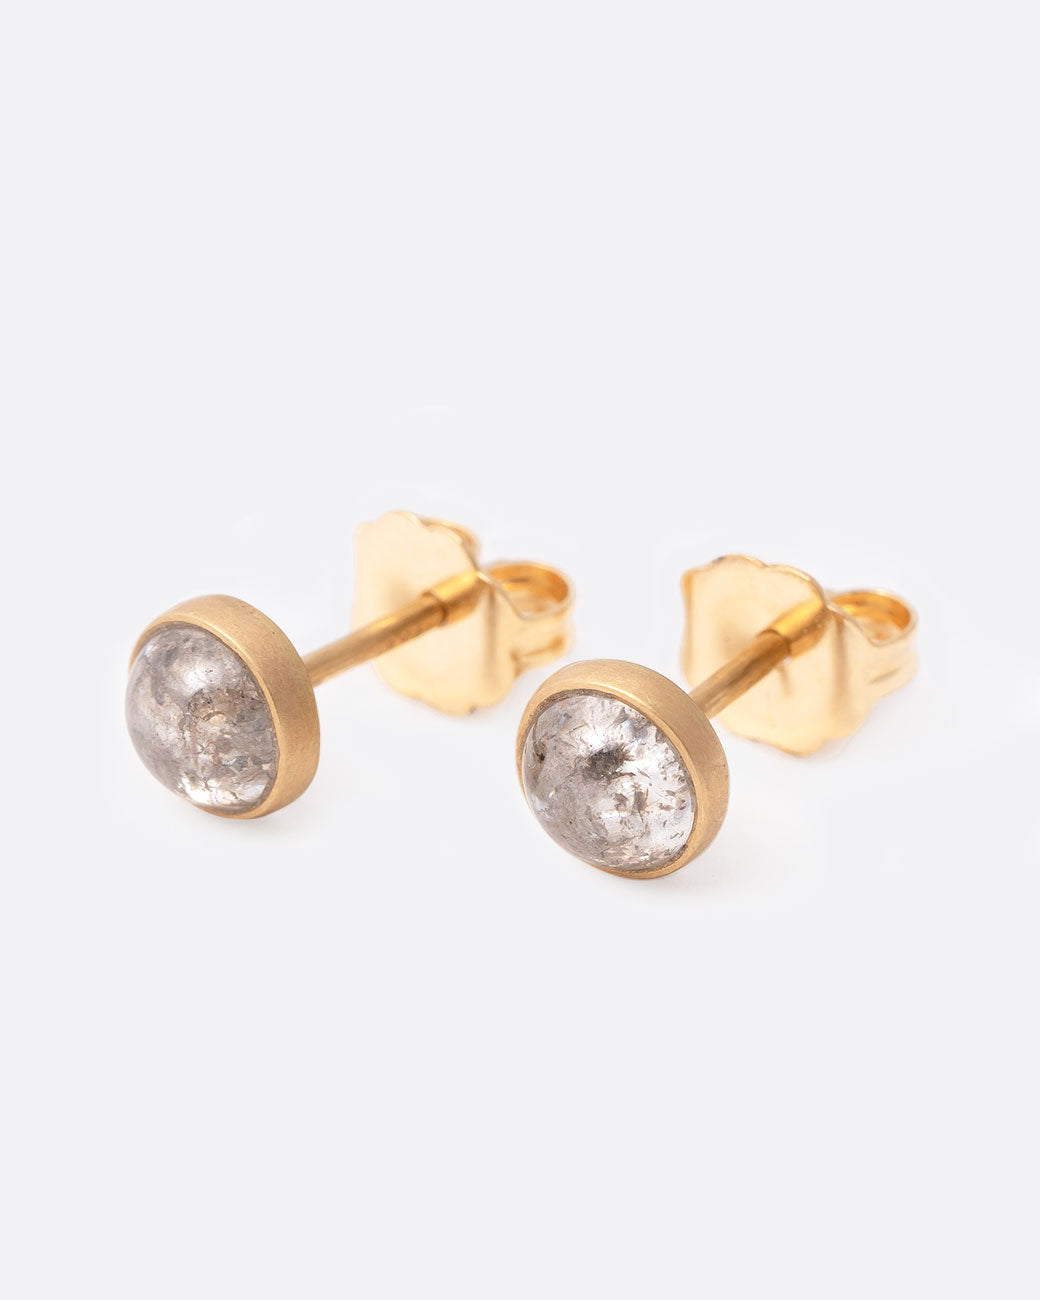 18k yellow gold stud earrings with gray diamond cabochons by Lola Brooks, shown from the side.